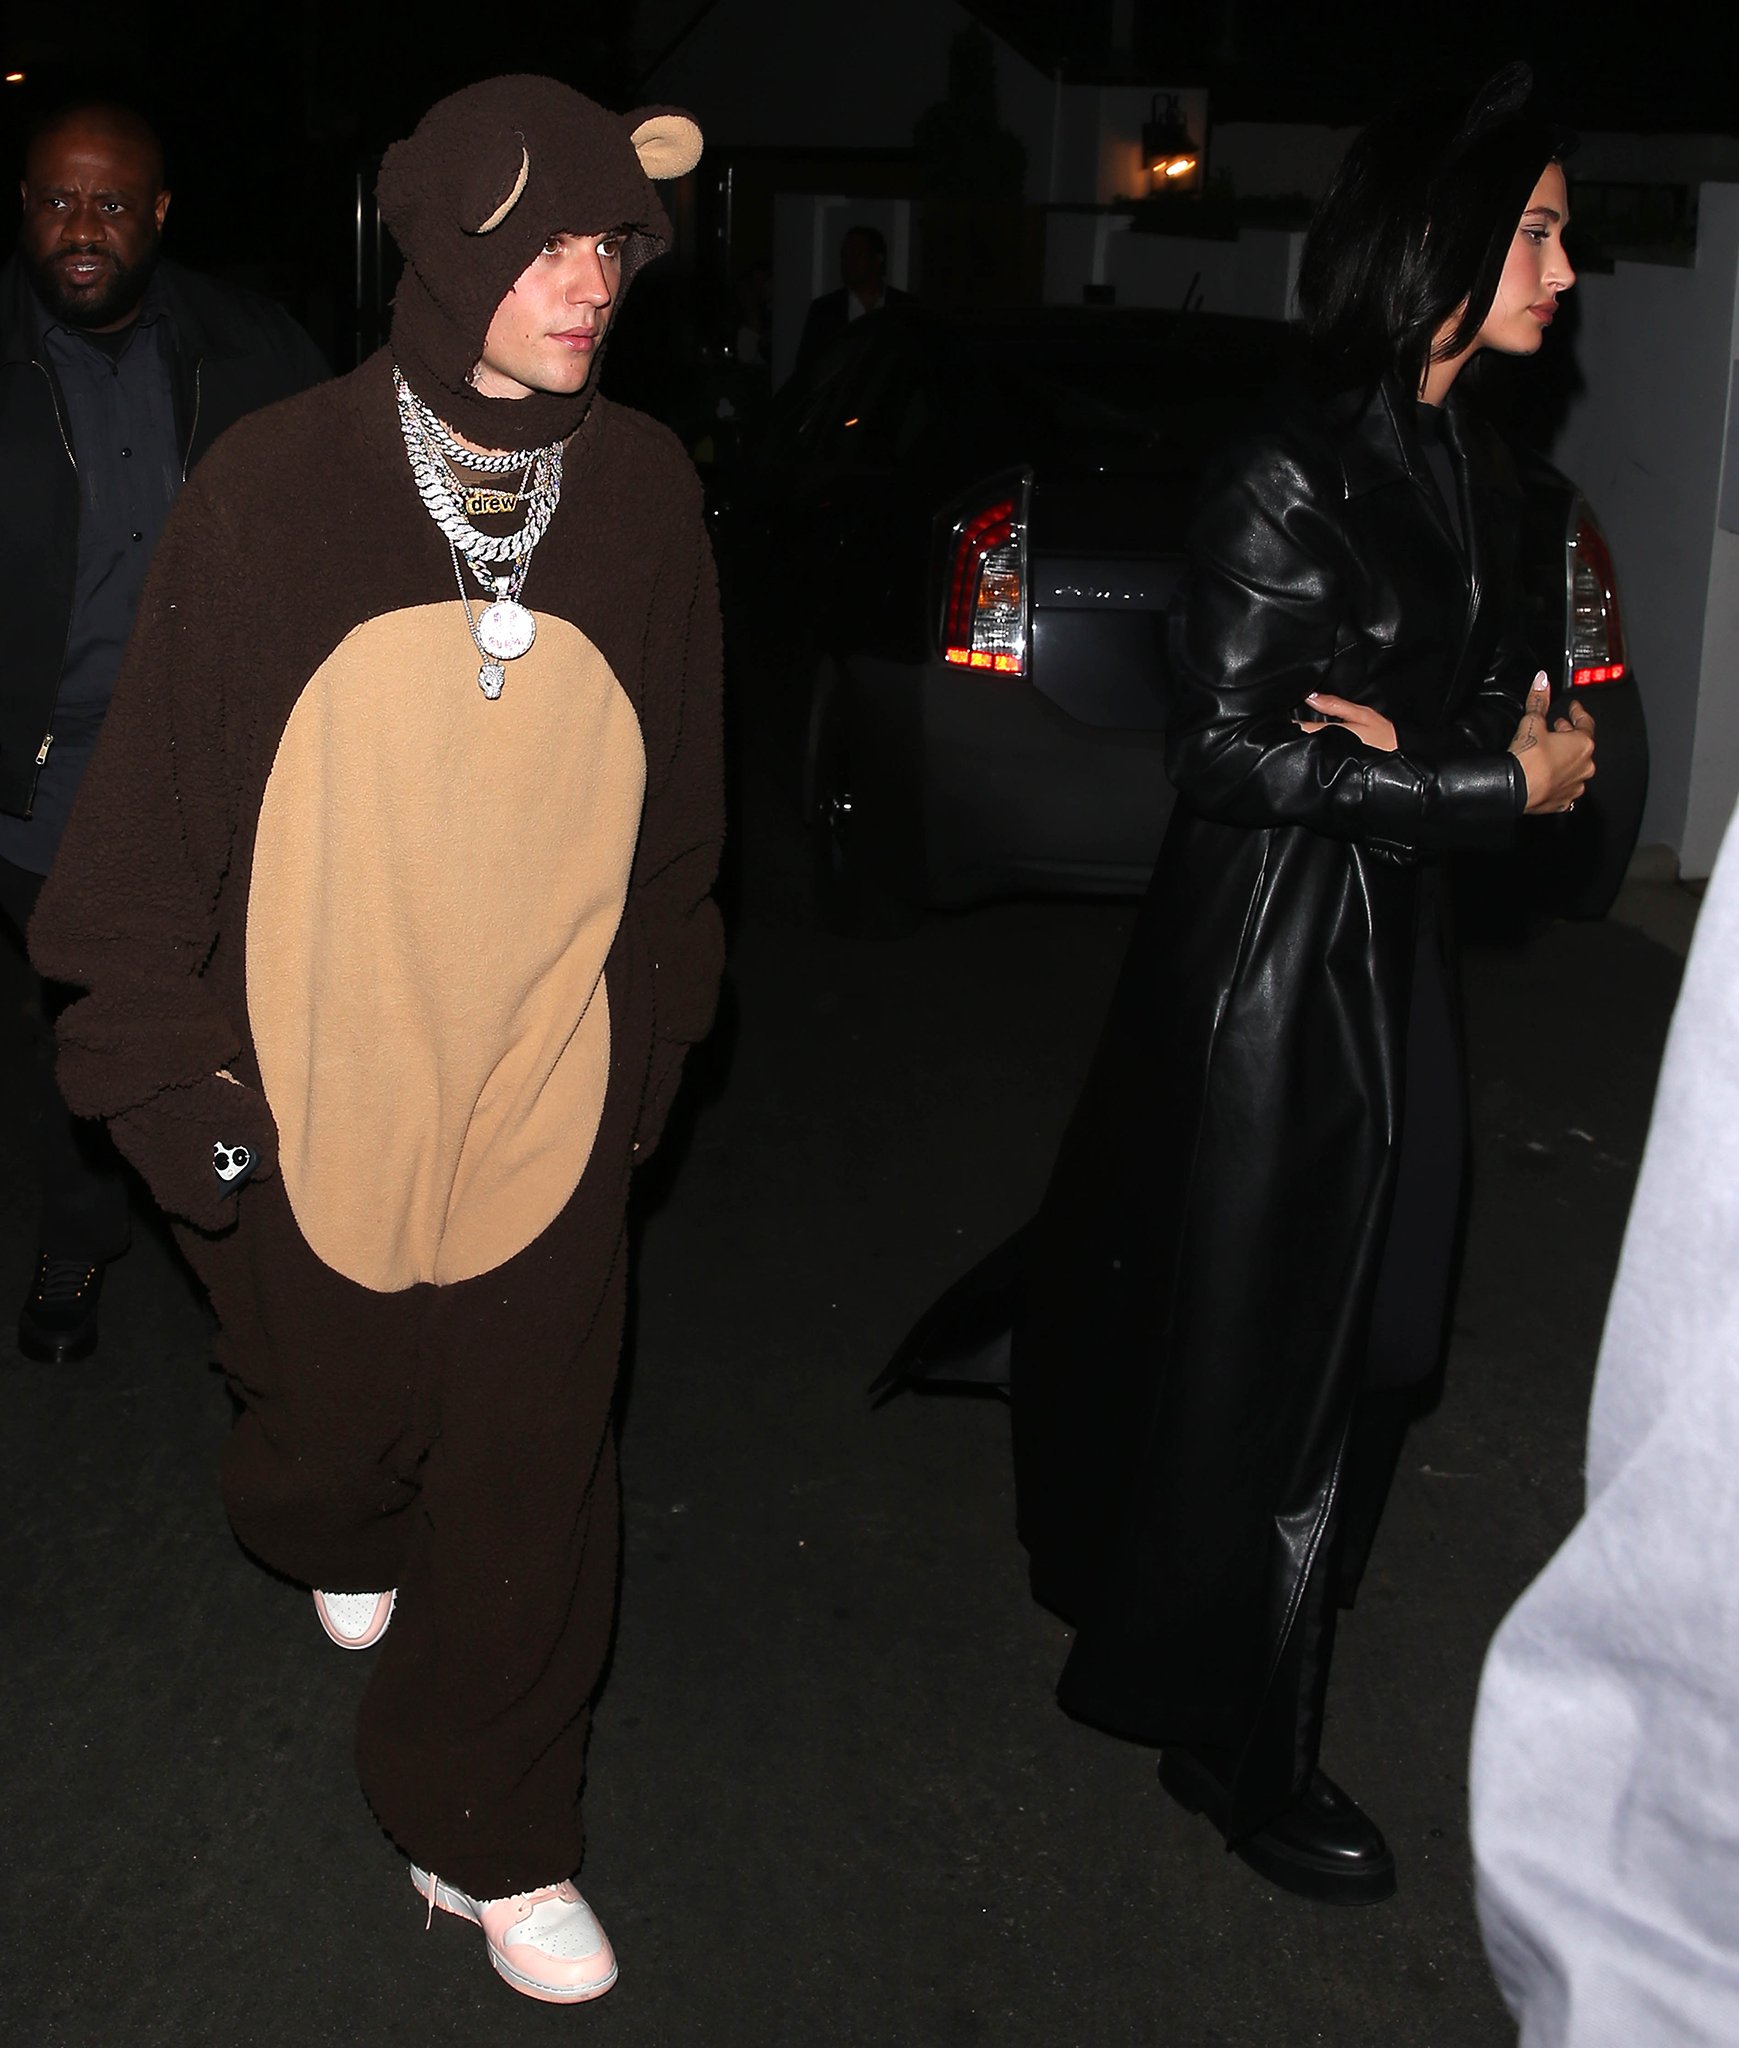 Justin Bieber dresses up as a fluffy bear while Hailey dons a leather trench coat over her catwoman suit